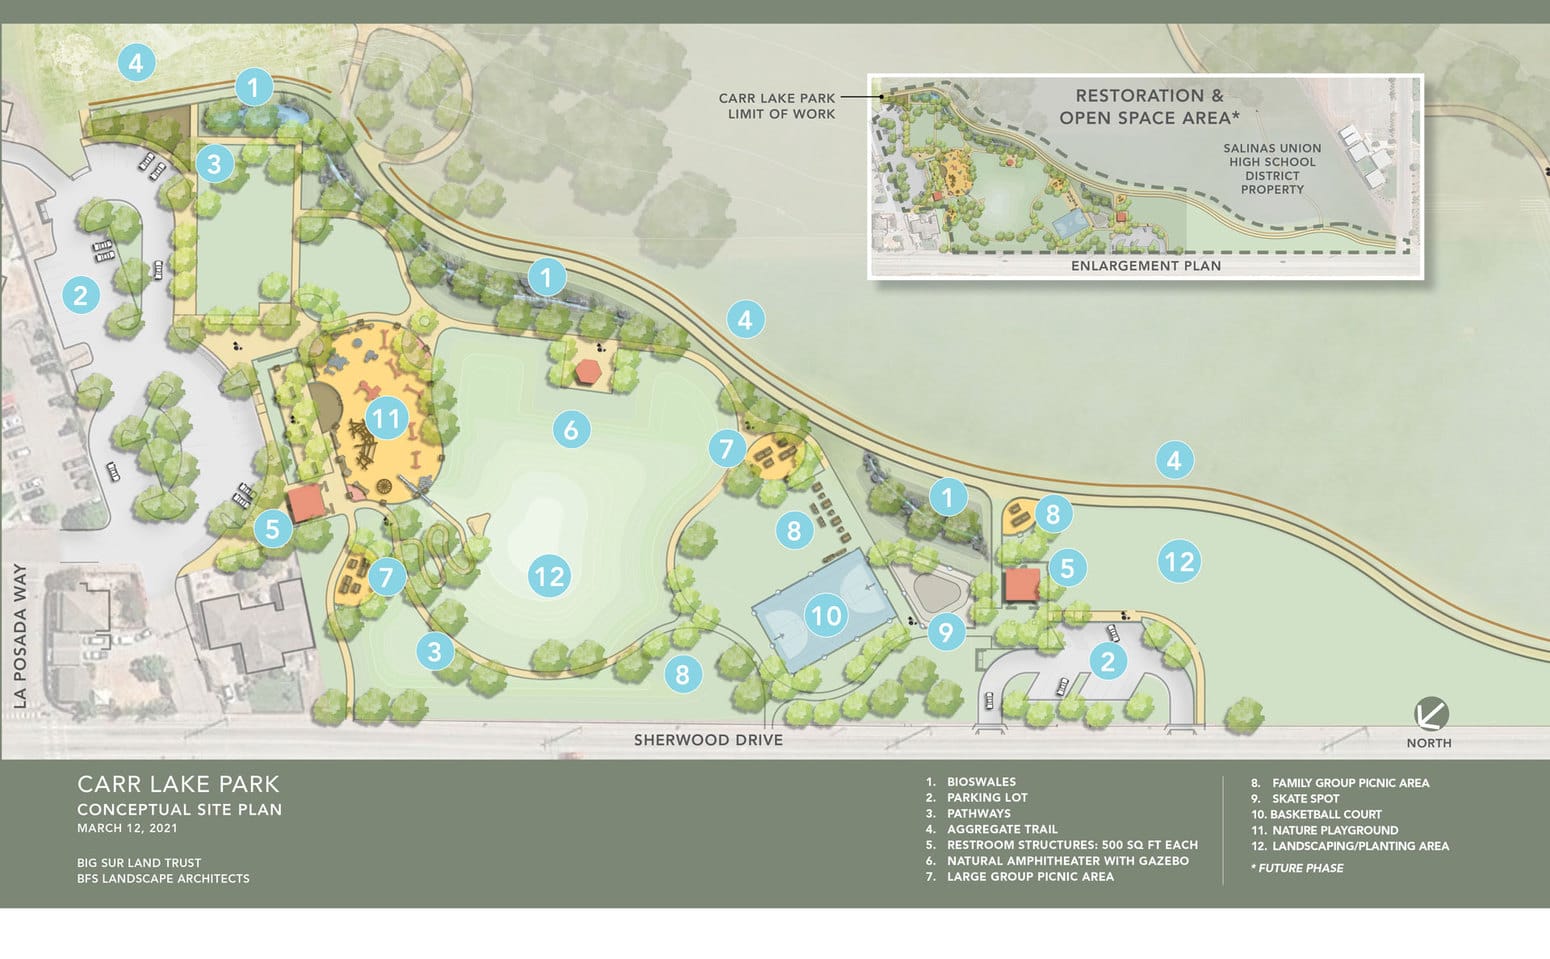 Carr Lake Park Conceptual Site Plan with numbered key areas